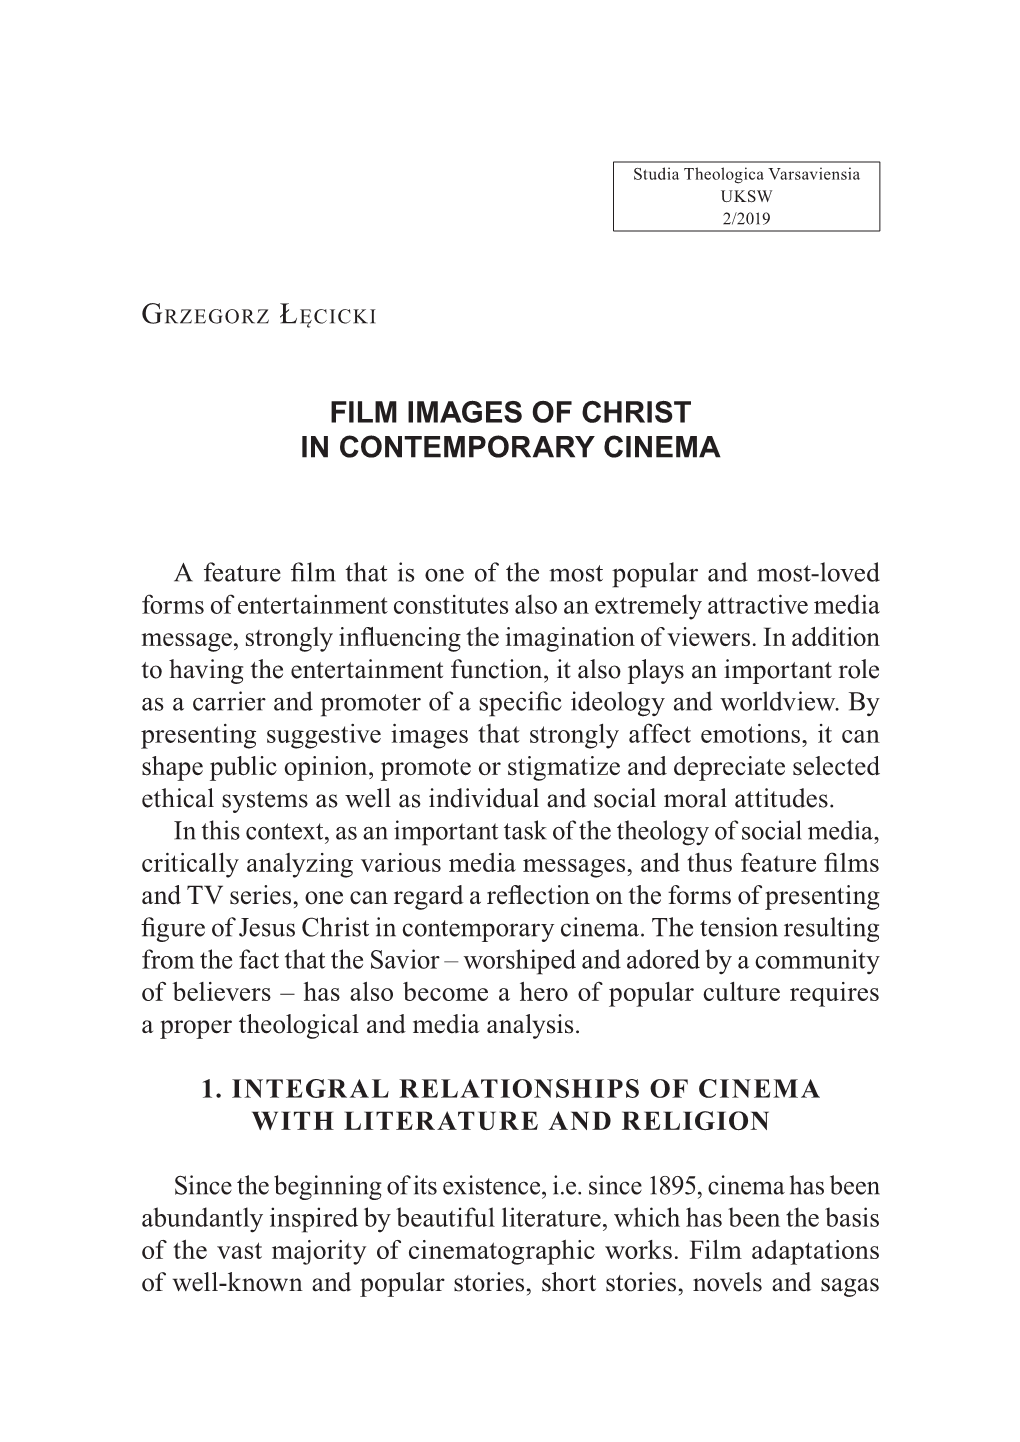 Film Images of Christ in Contemporary Cinema